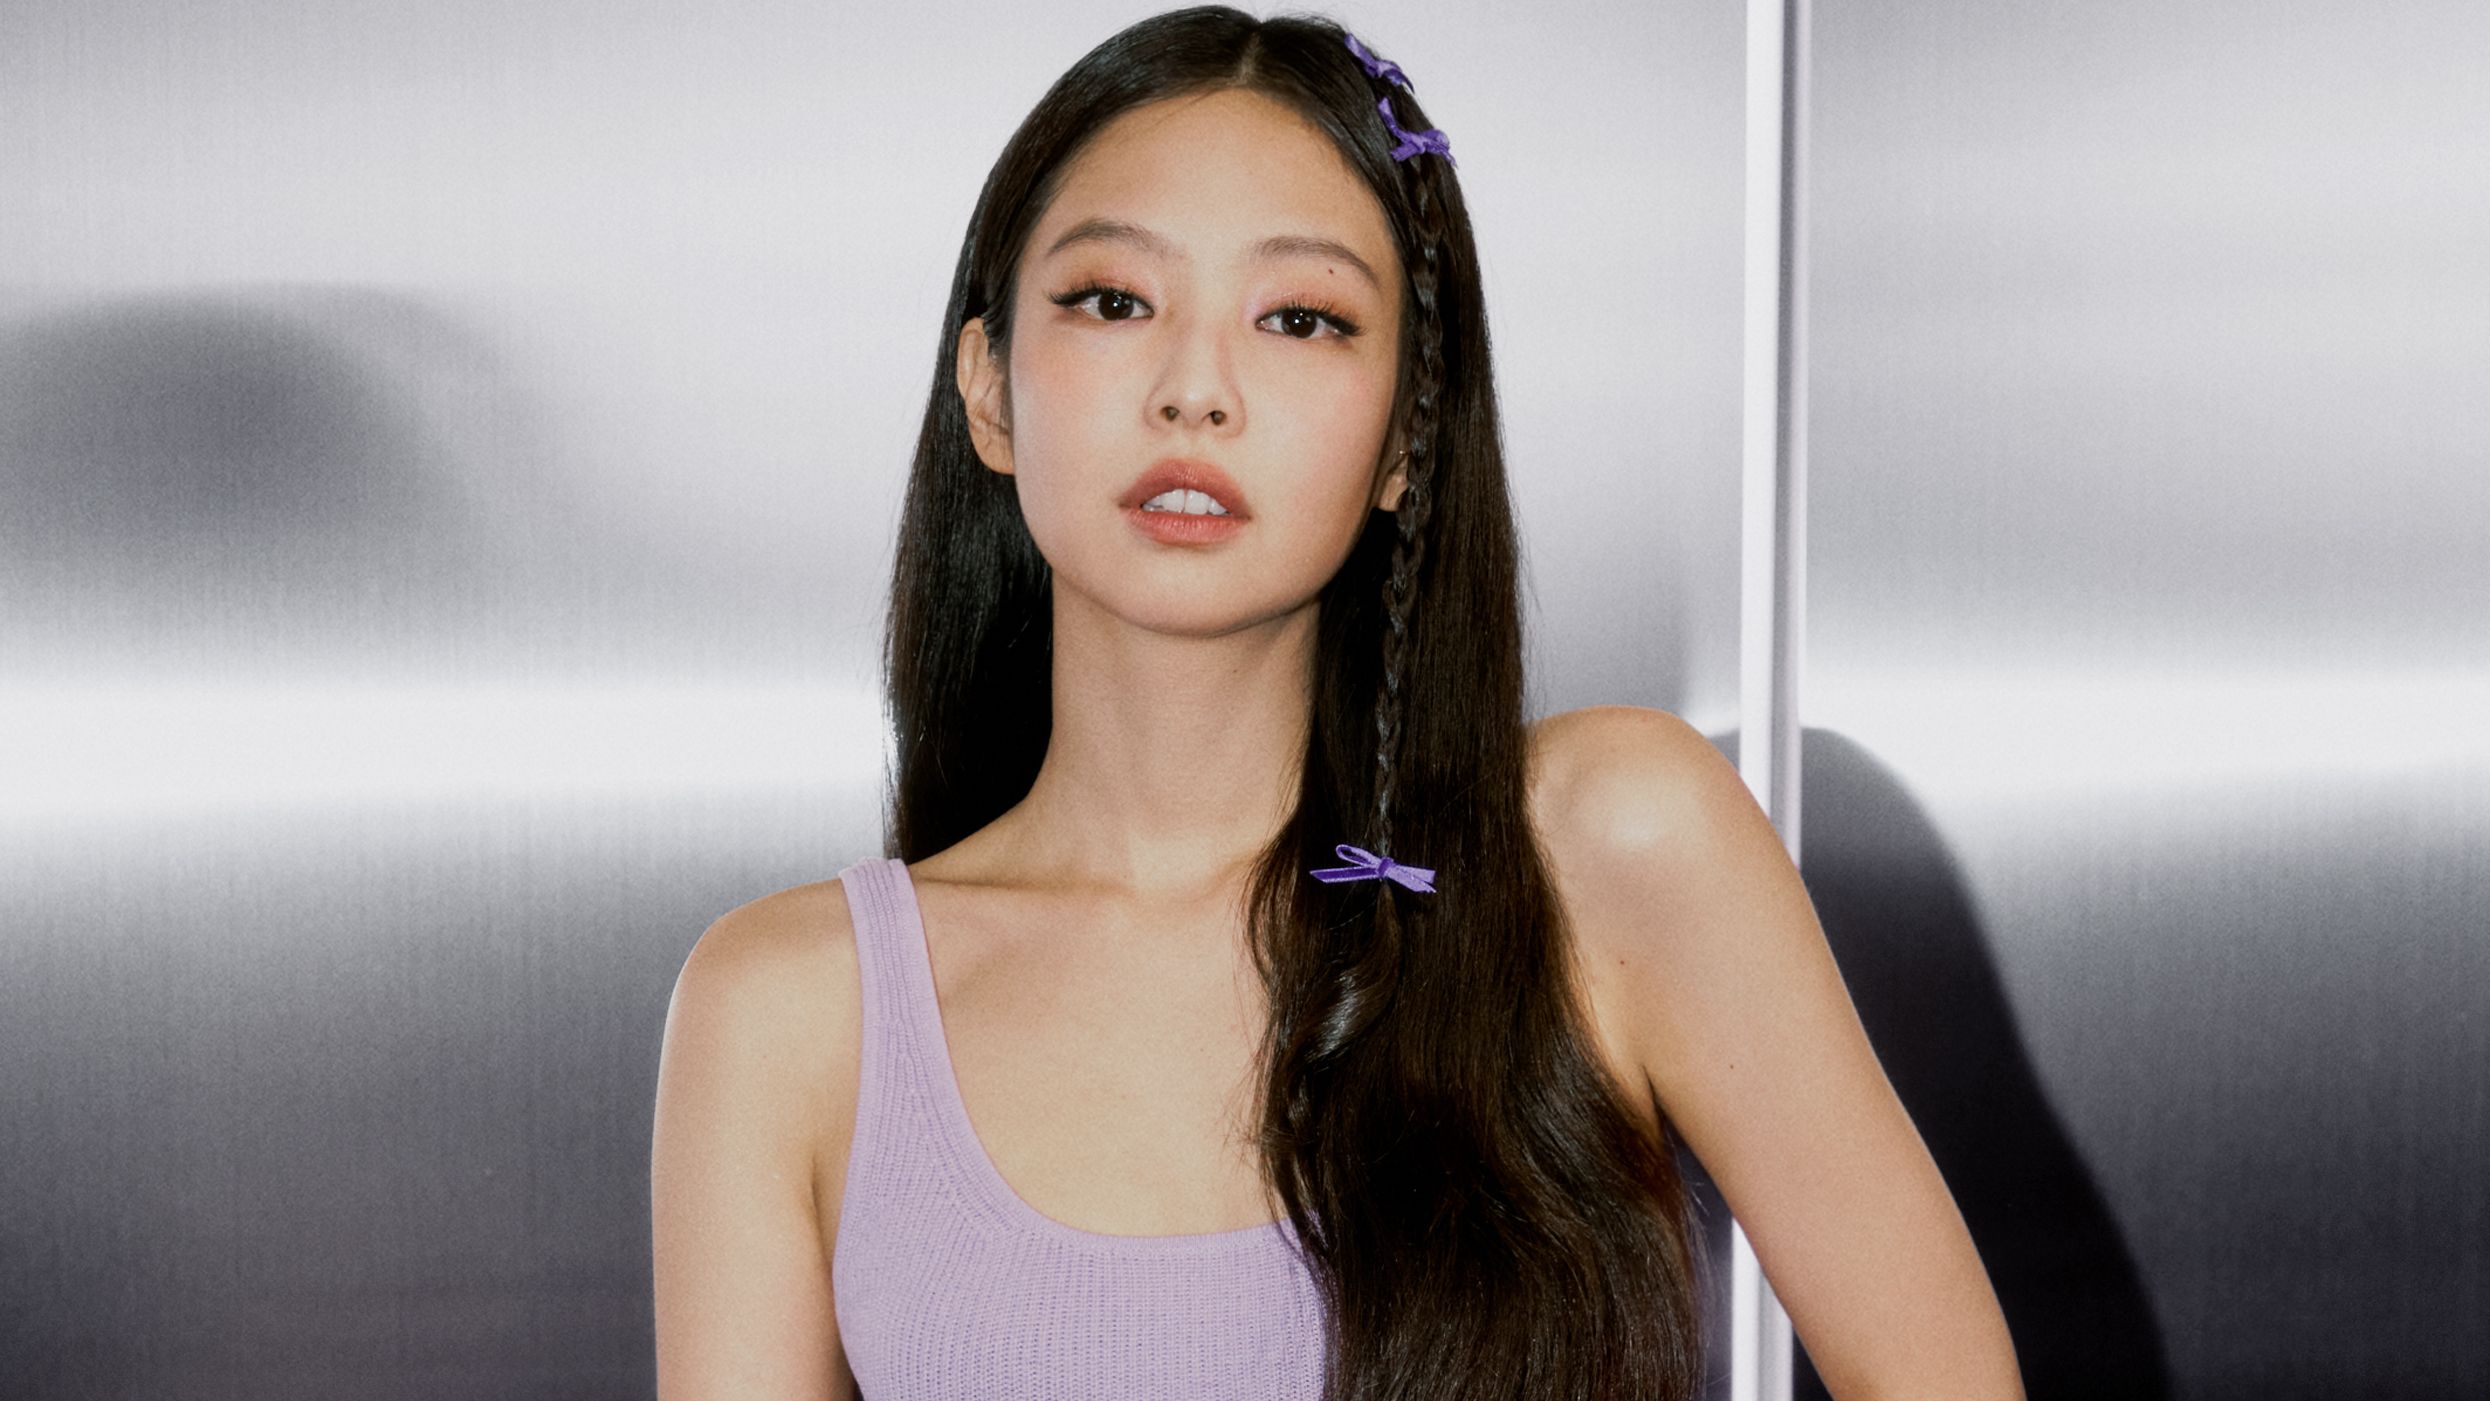 BLACKPINK's Jennie shows off her gorgeous figure as a 'Calvin